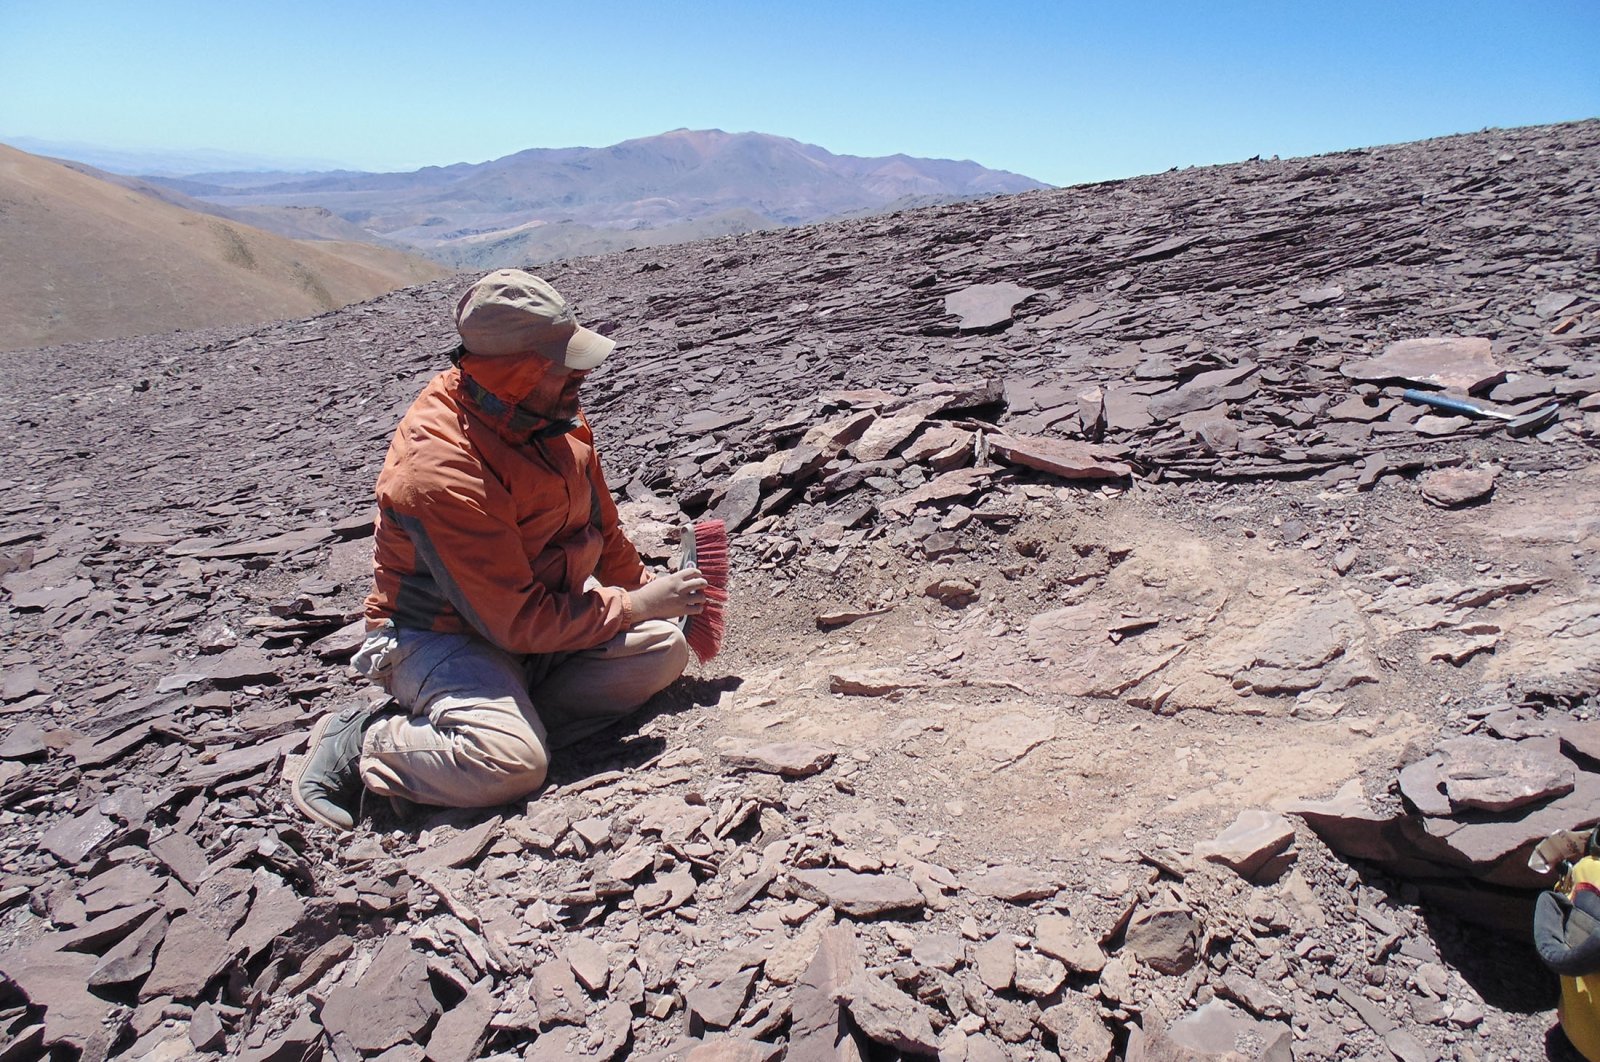 A palaeontologist works at the place where pterosaur fossils were found at &quot;Tormento&quot; hill in the Atacama desert at Atacama region, Chile. (Reuters Photo)